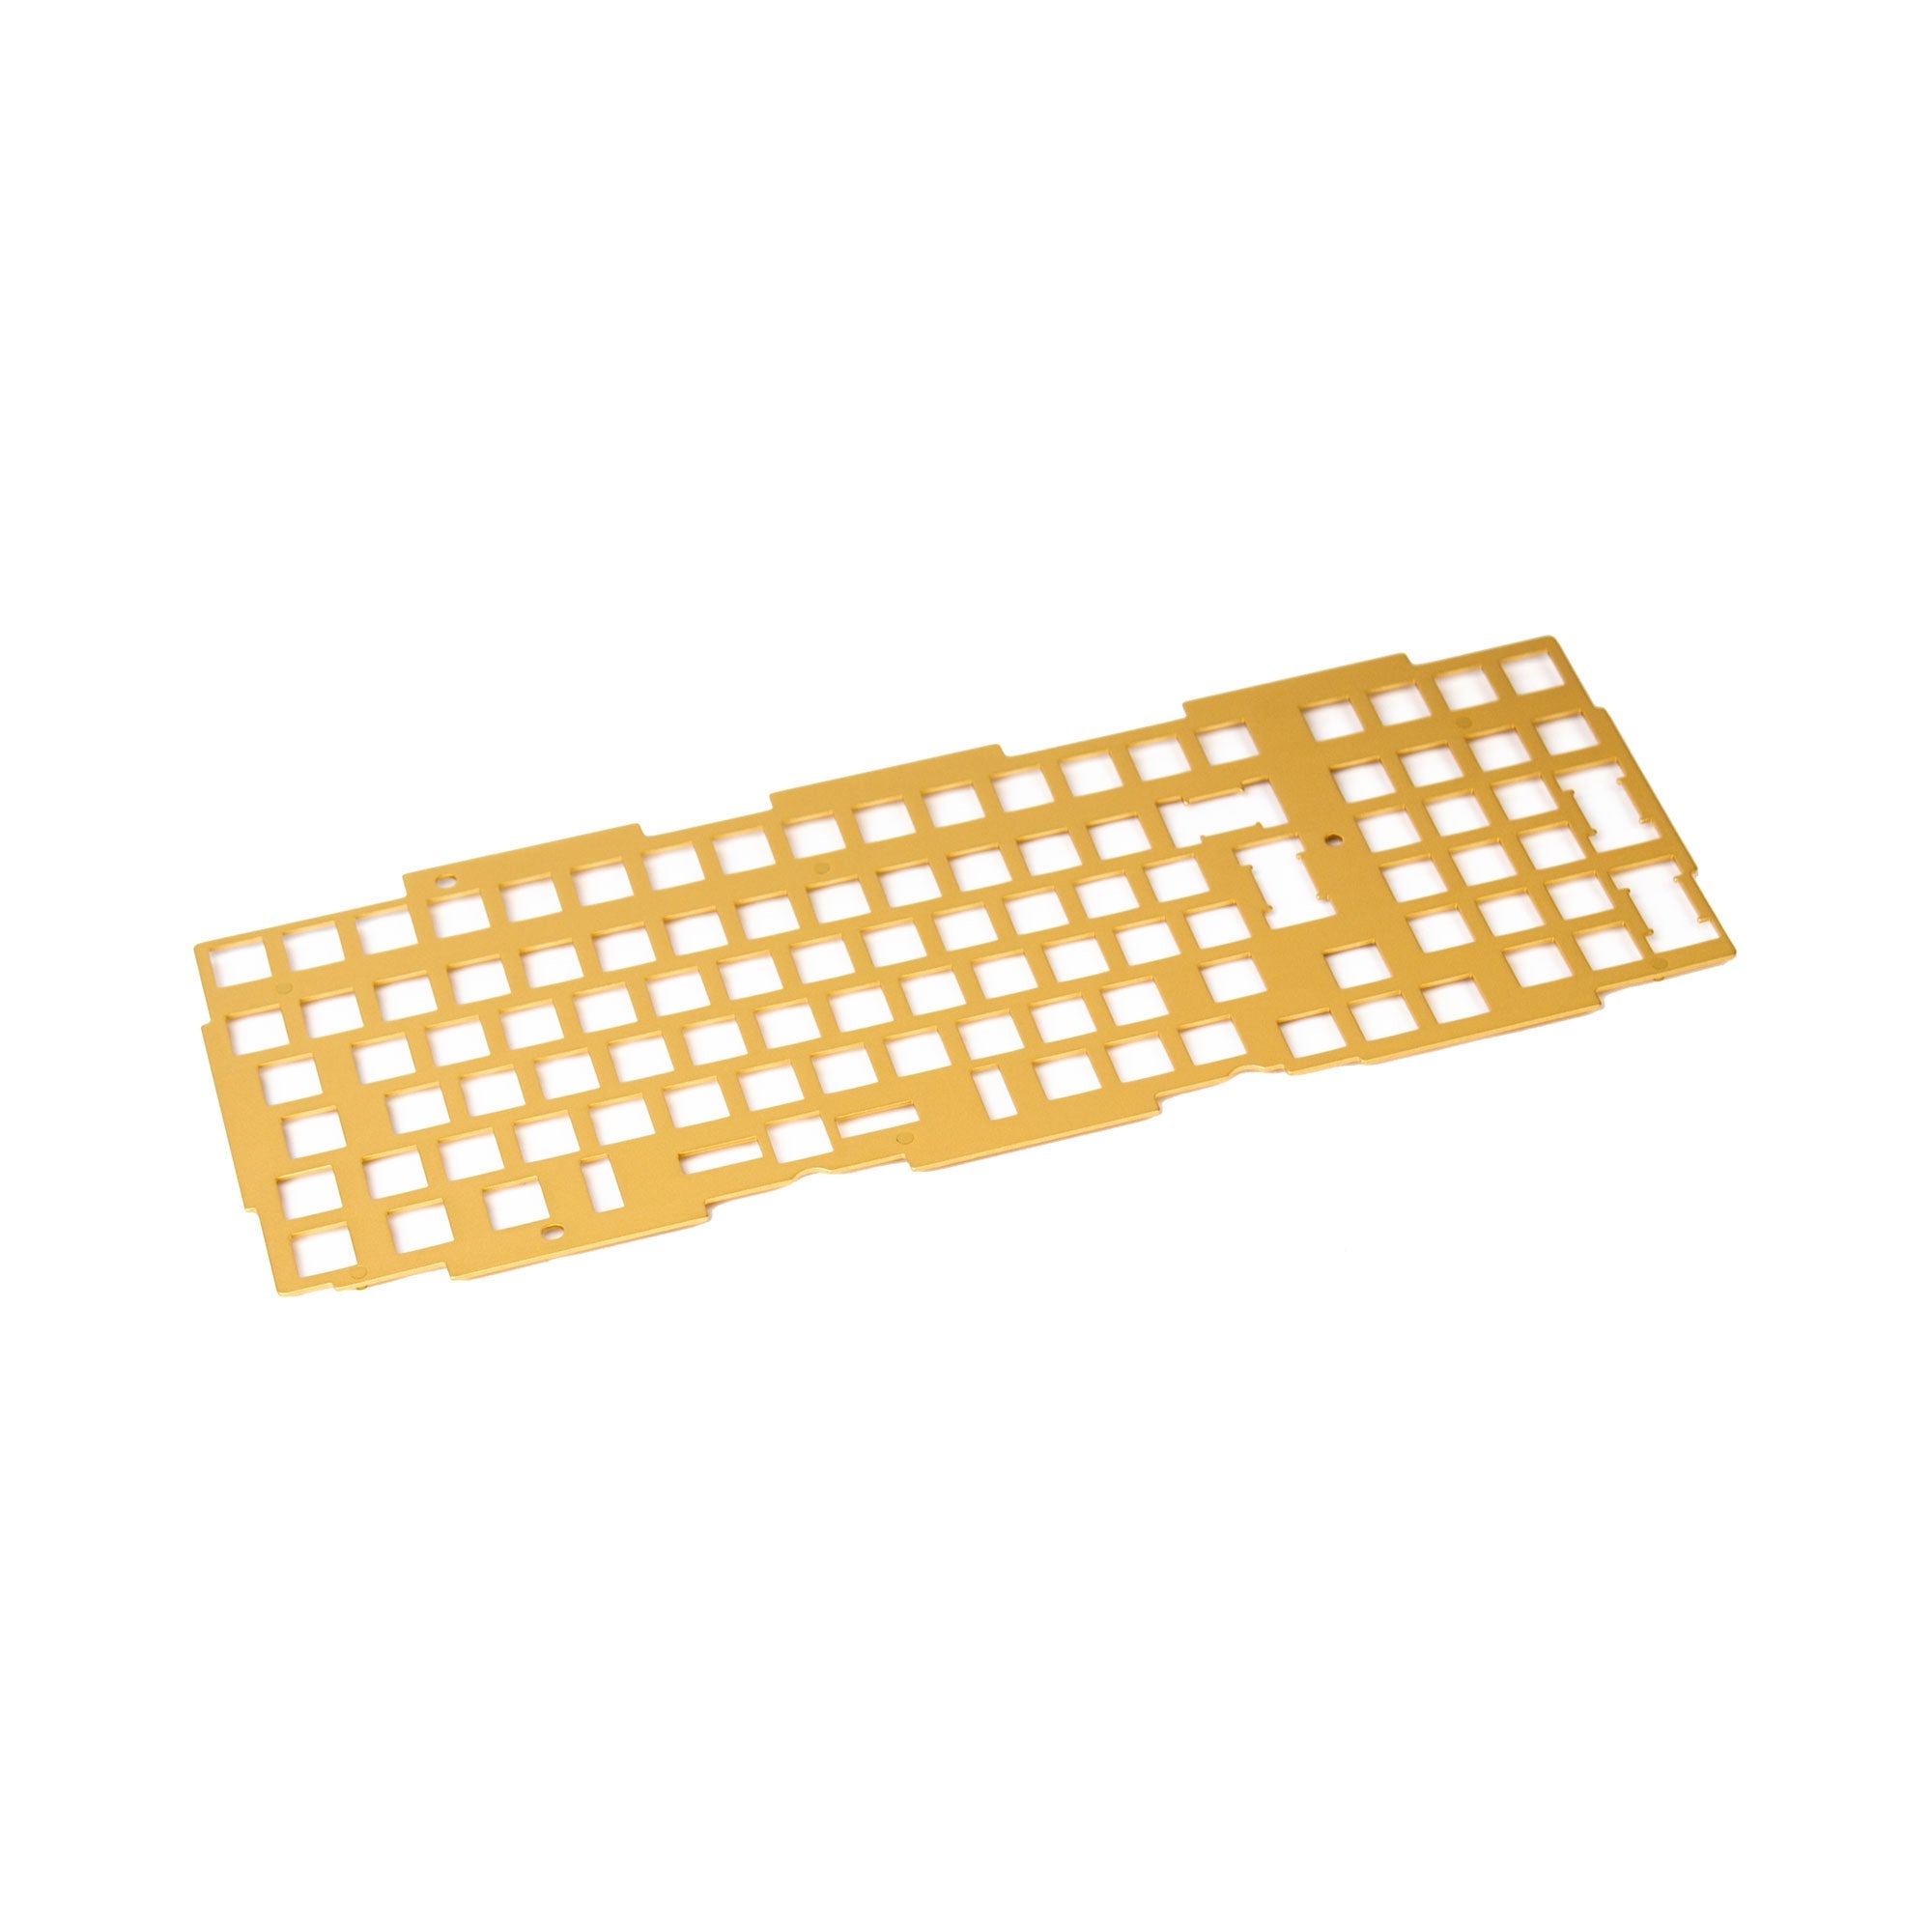 Keychron Q5 Brass Plate ISO Layout